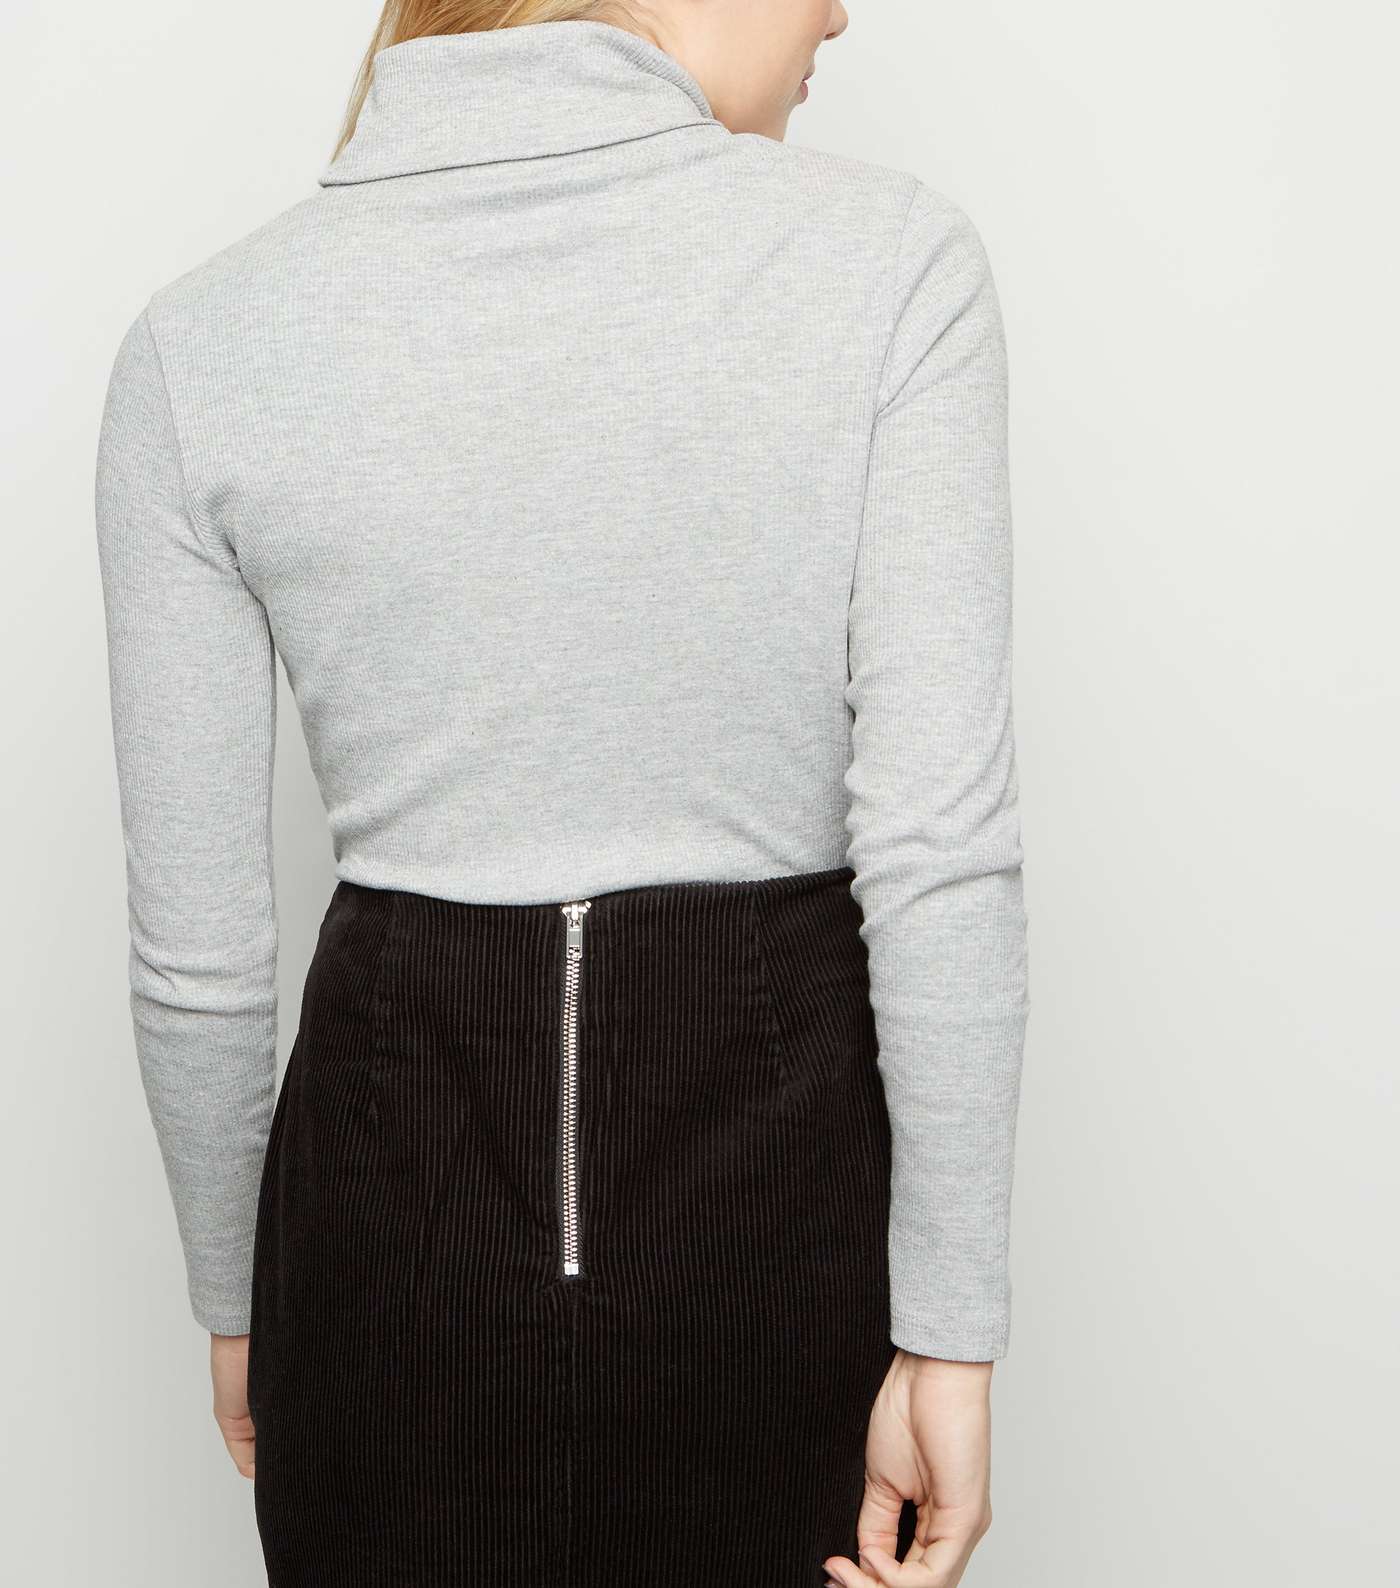 Petite Pale Grey Roll Neck Long Sleeve Top Image 3